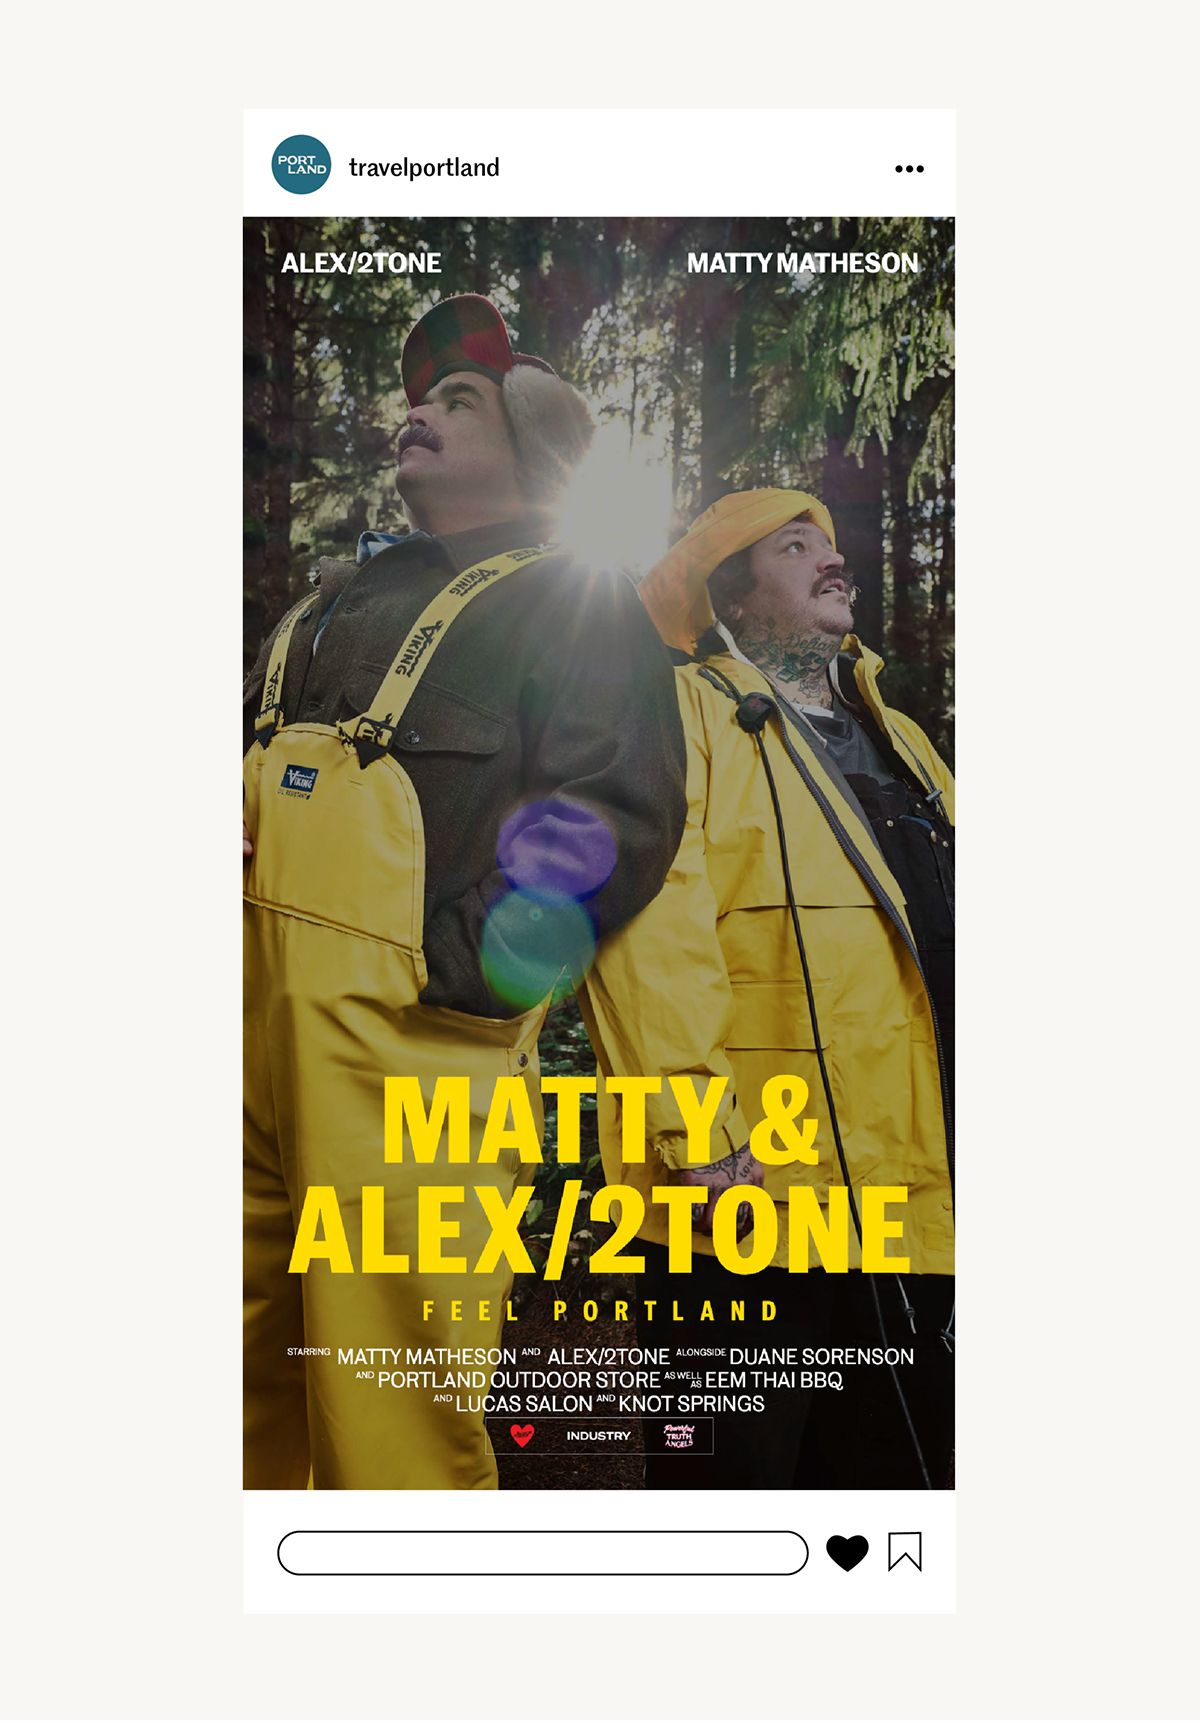 Matty & Ales/2Tone feel portland movie poster social media post. Matty and Alex in raincoats in forest with movie poster text overlayed